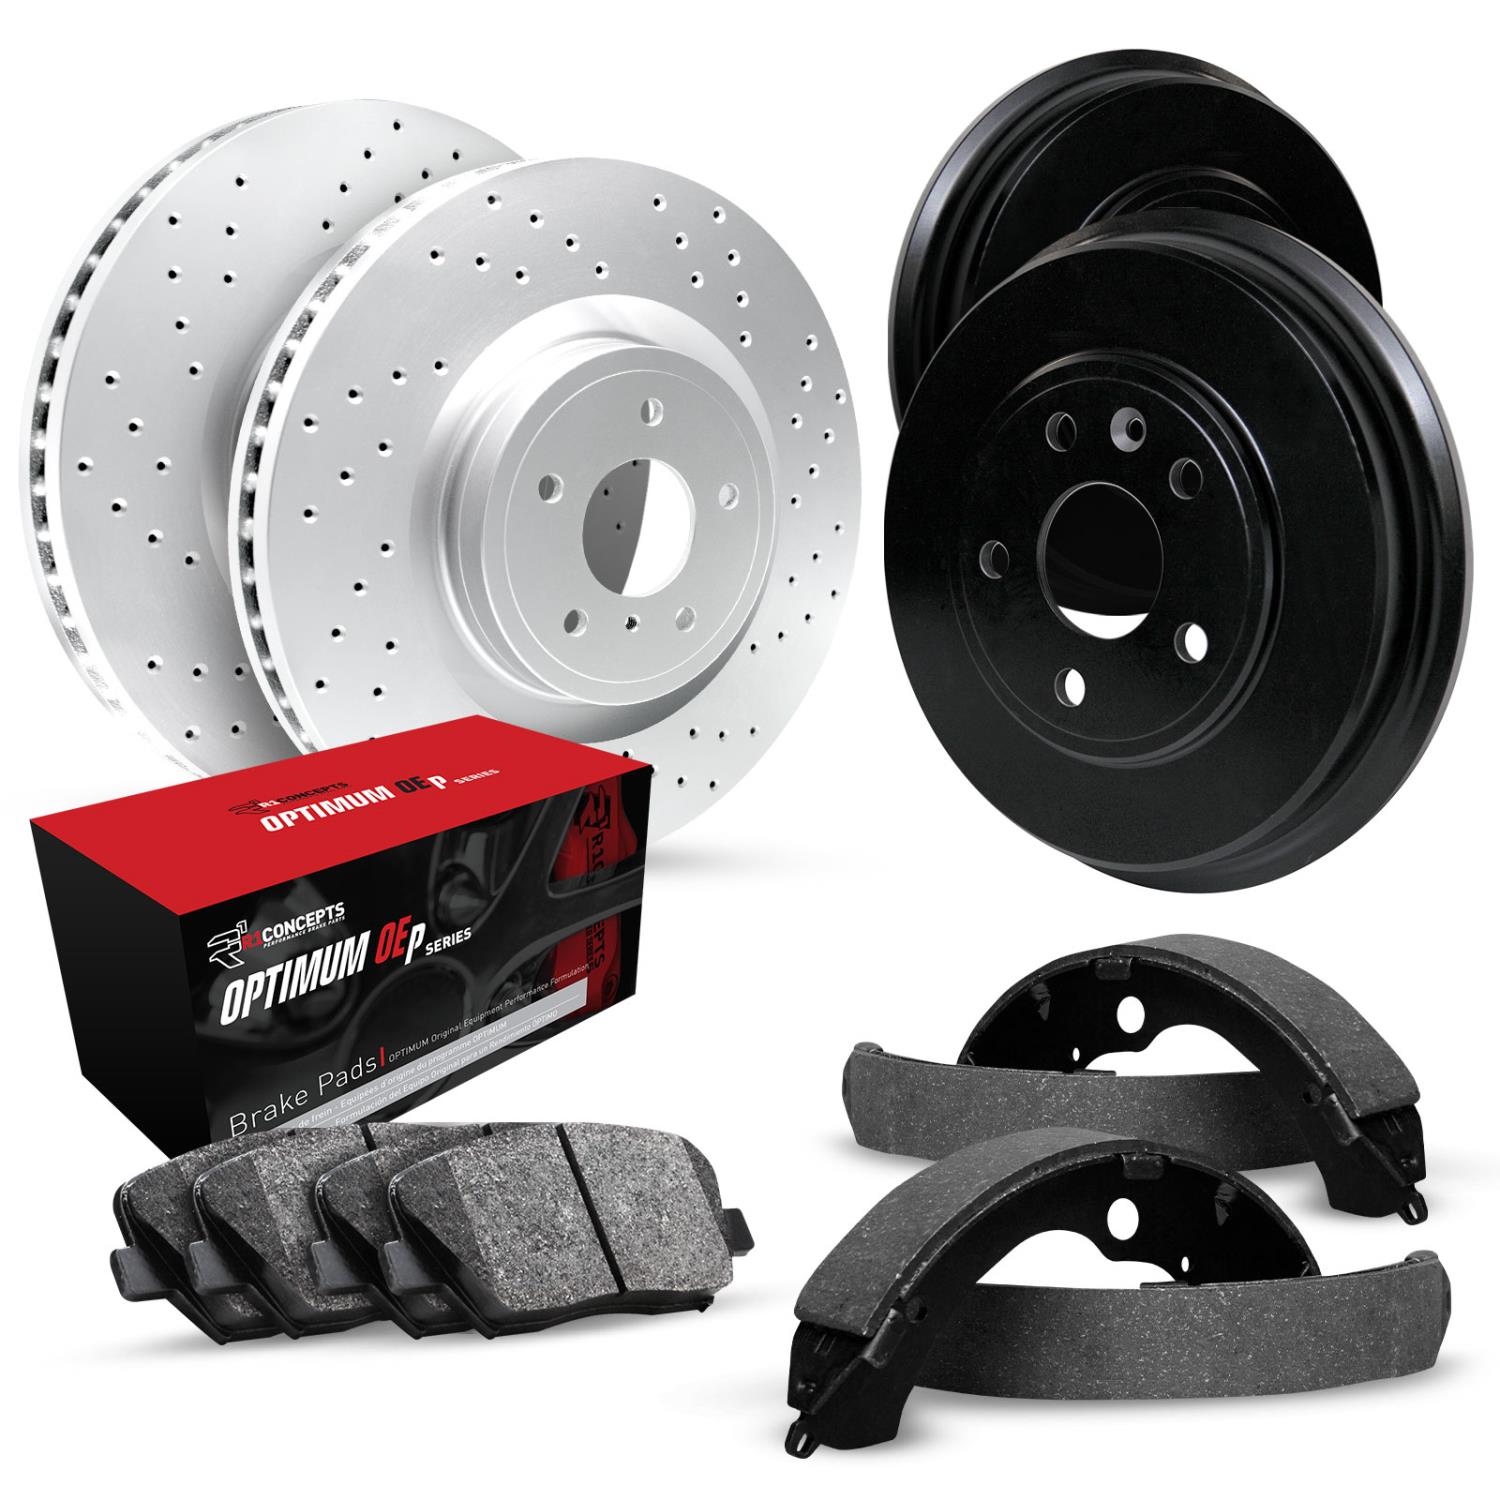 GEO-Carbon Drilled Brake Rotor & Drum Set w/Optimum OE Pads & Shoes, 1971-1971 GM, Position: Front & Rear